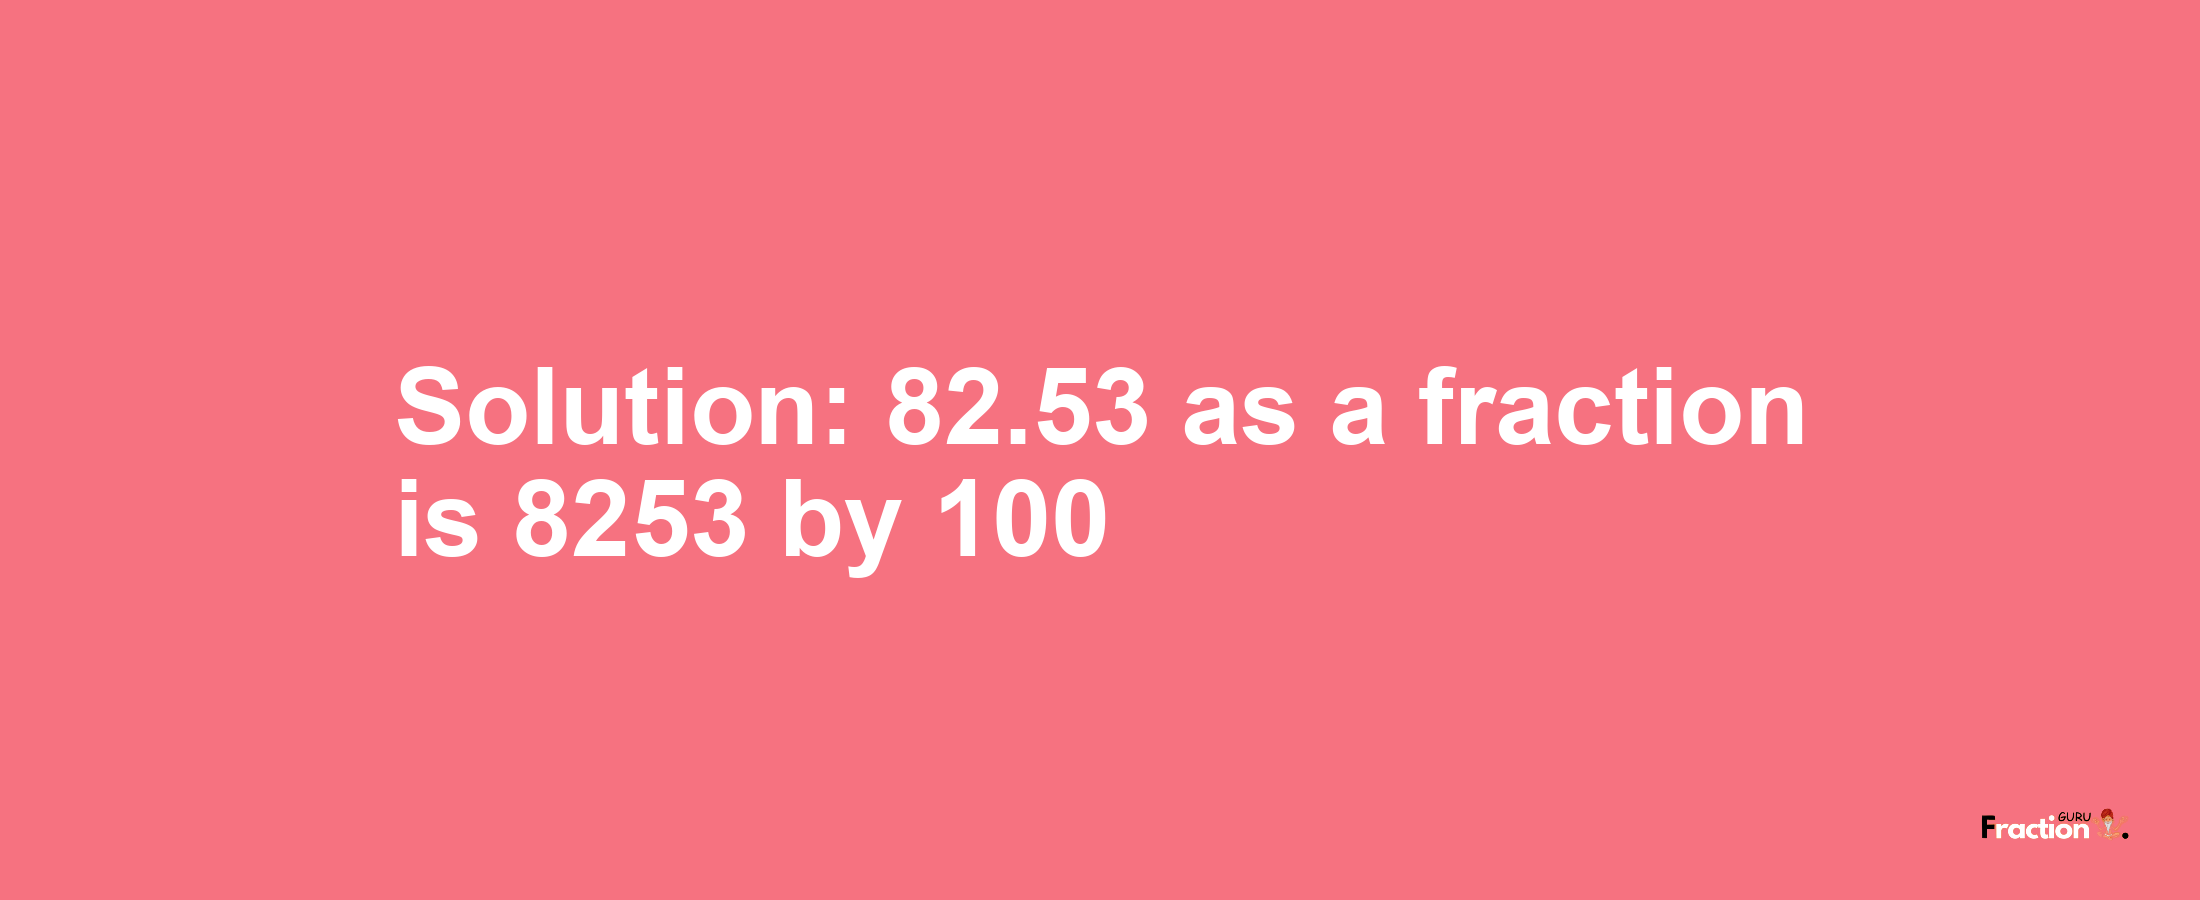 Solution:82.53 as a fraction is 8253/100